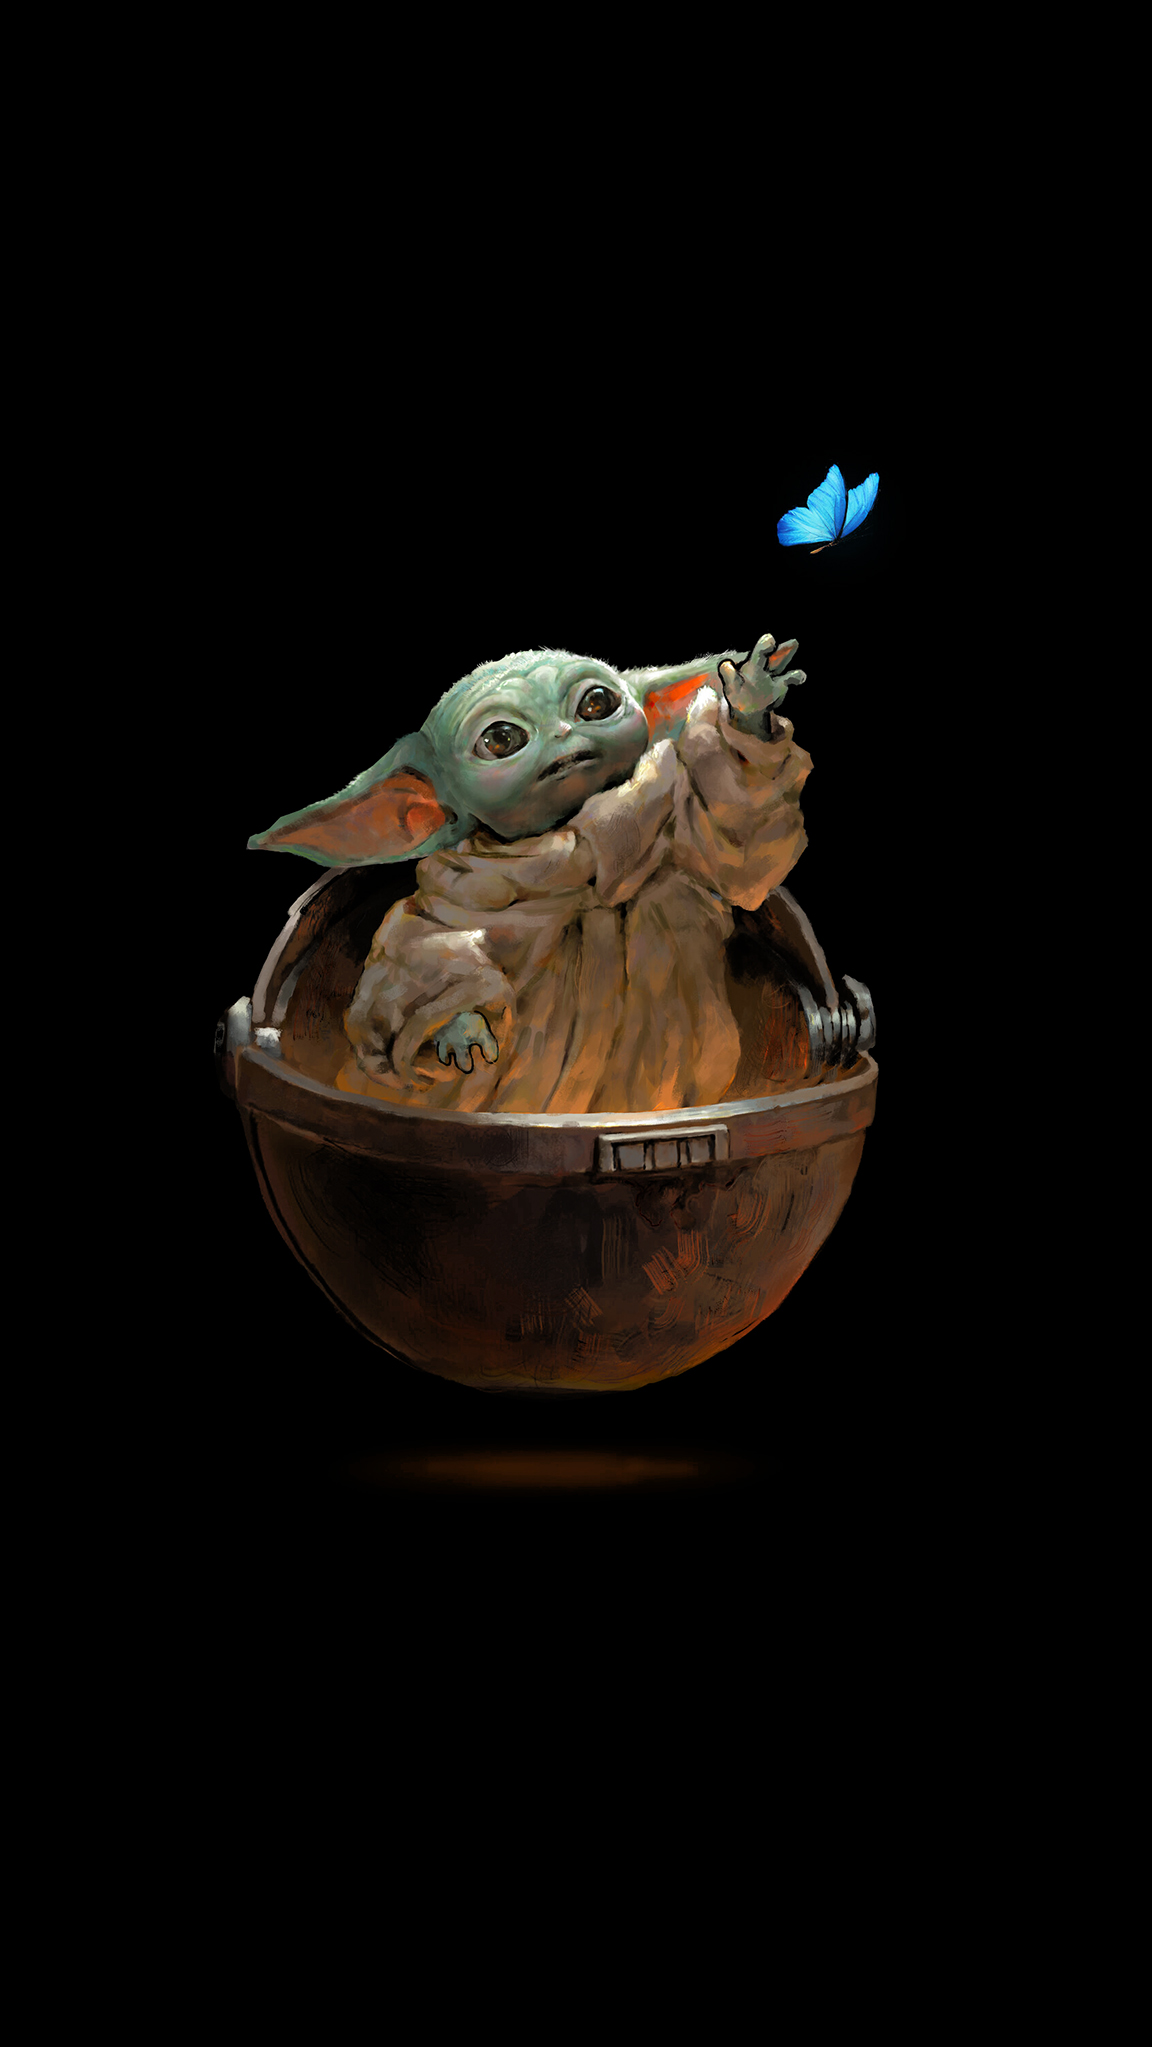 The Child Baby Yoda Background Wallpapers Heroscreen Cool Wallpapers